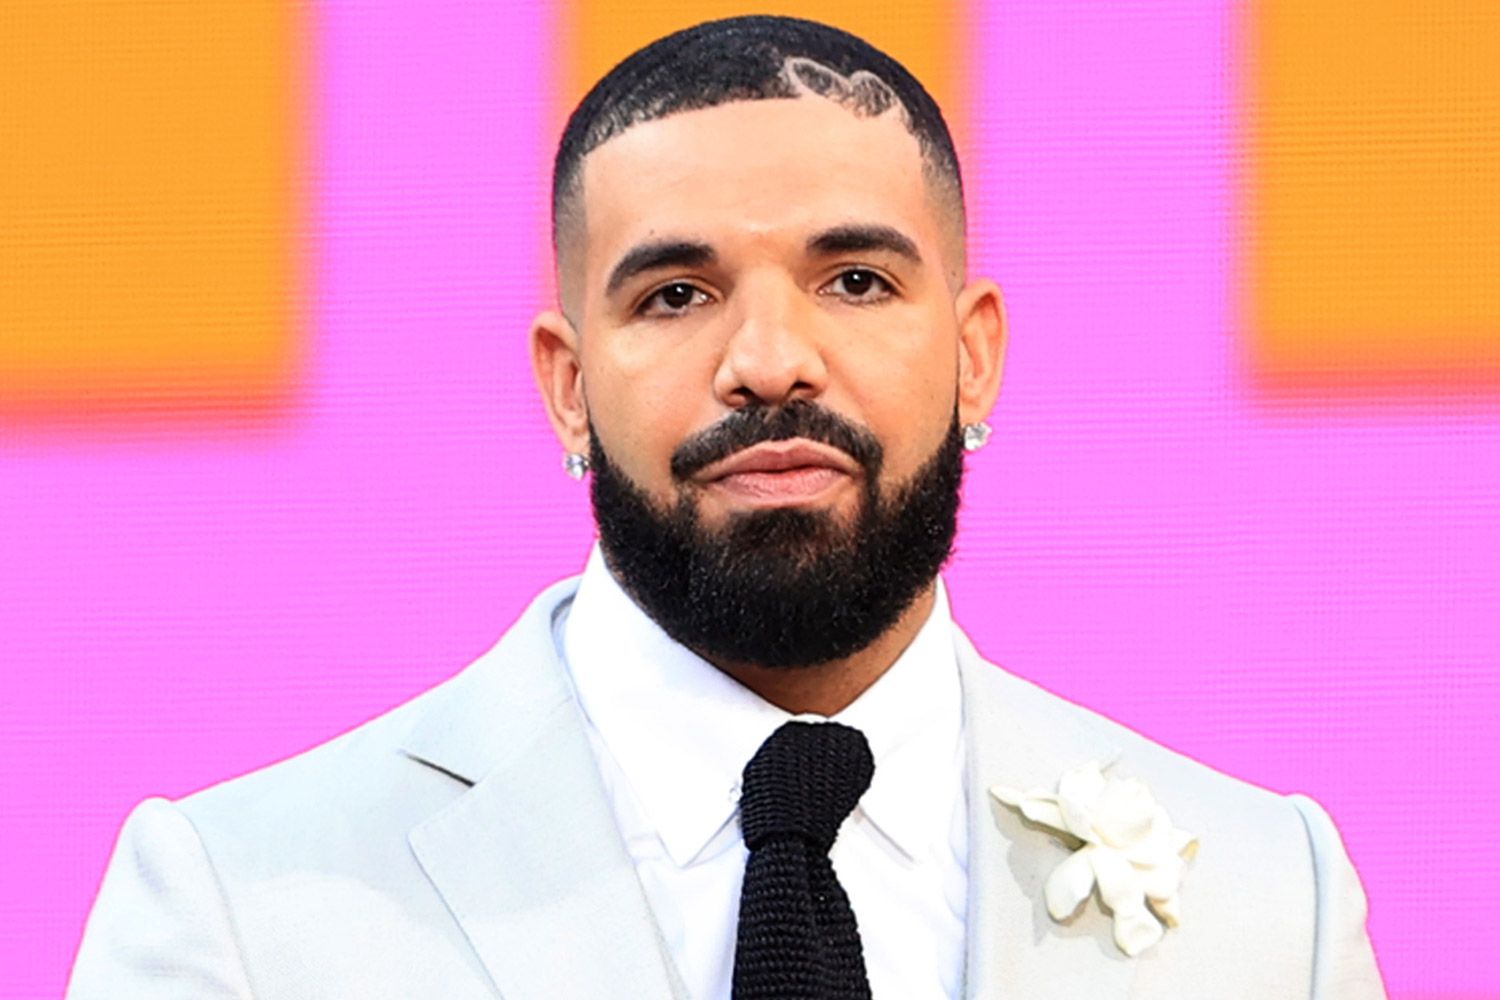 Drake Sets Record: First Artist To Sell 200 Million Single Units, Surpassing Michael Jackson And Elvis Presley